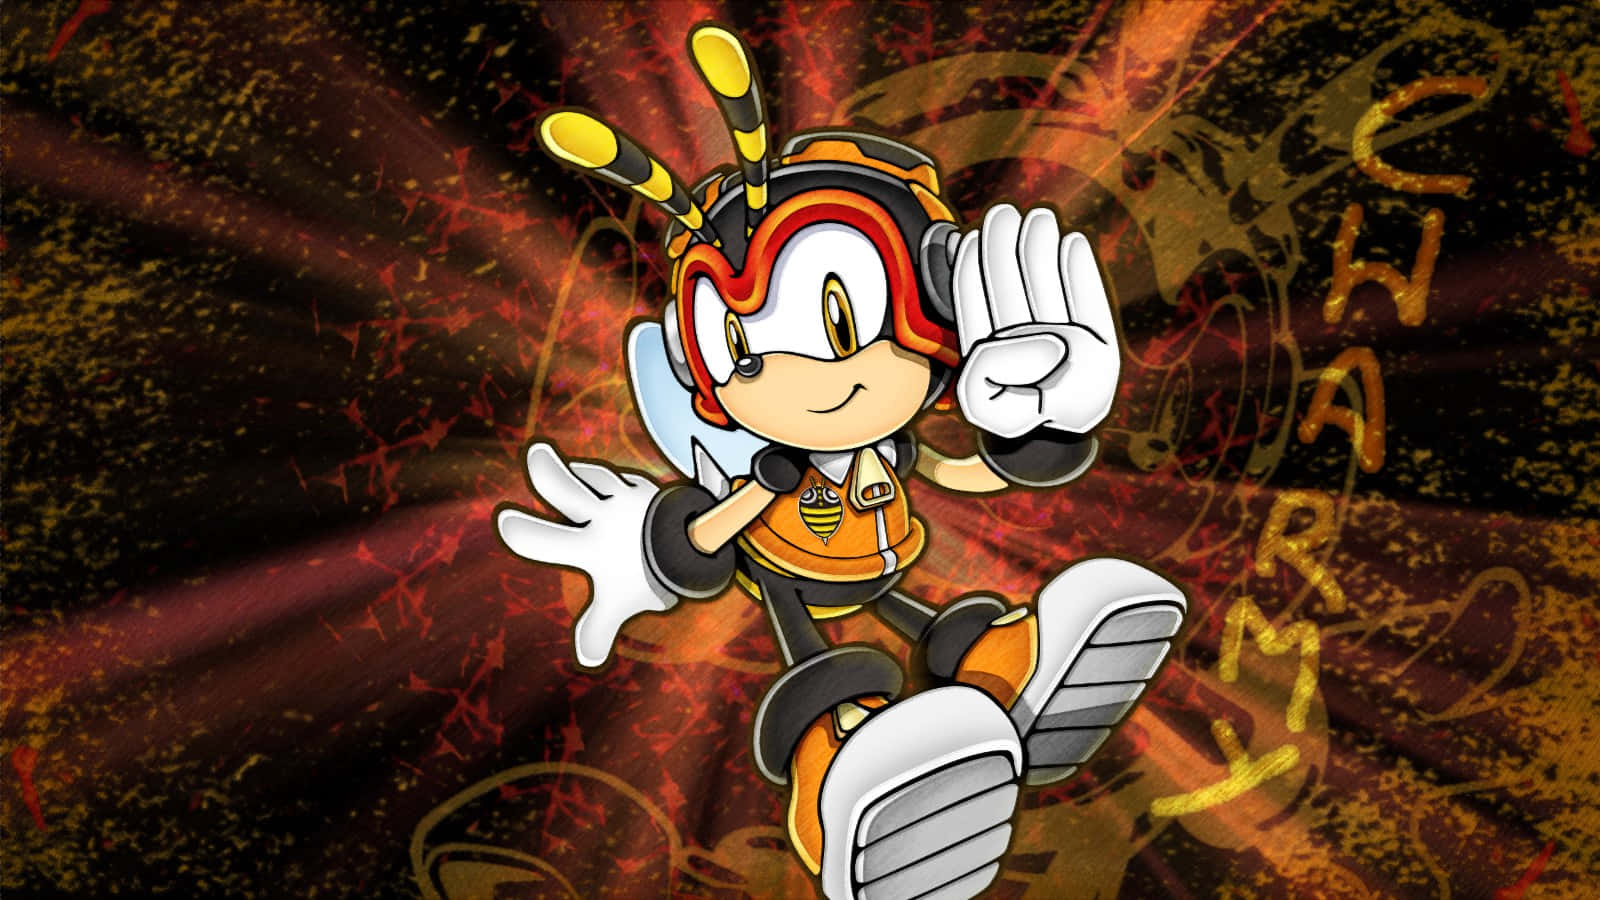 Charmy Bee Flying High in the Sky Wallpaper